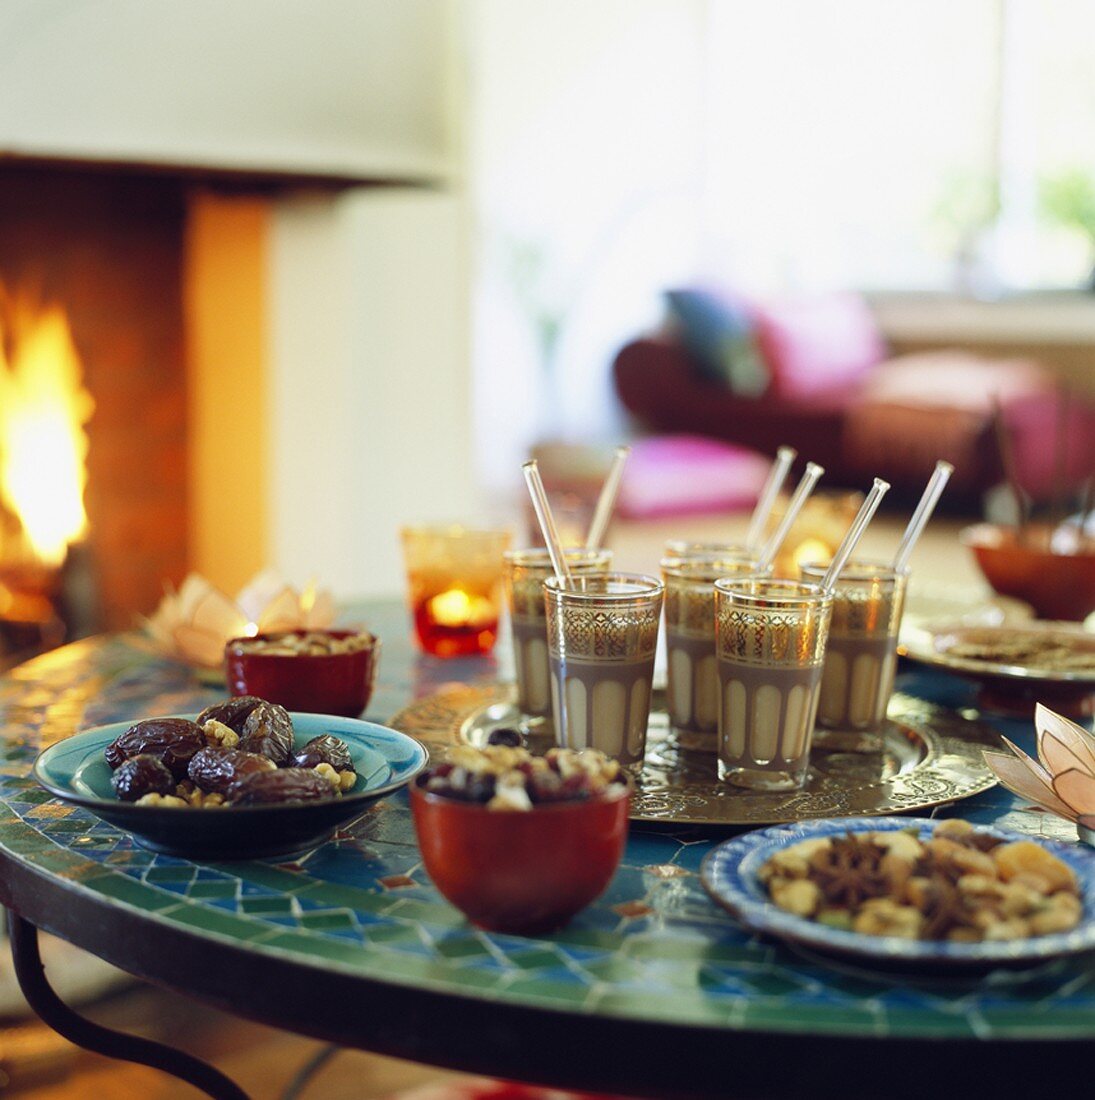 Coffee and snacks on table in front of fire